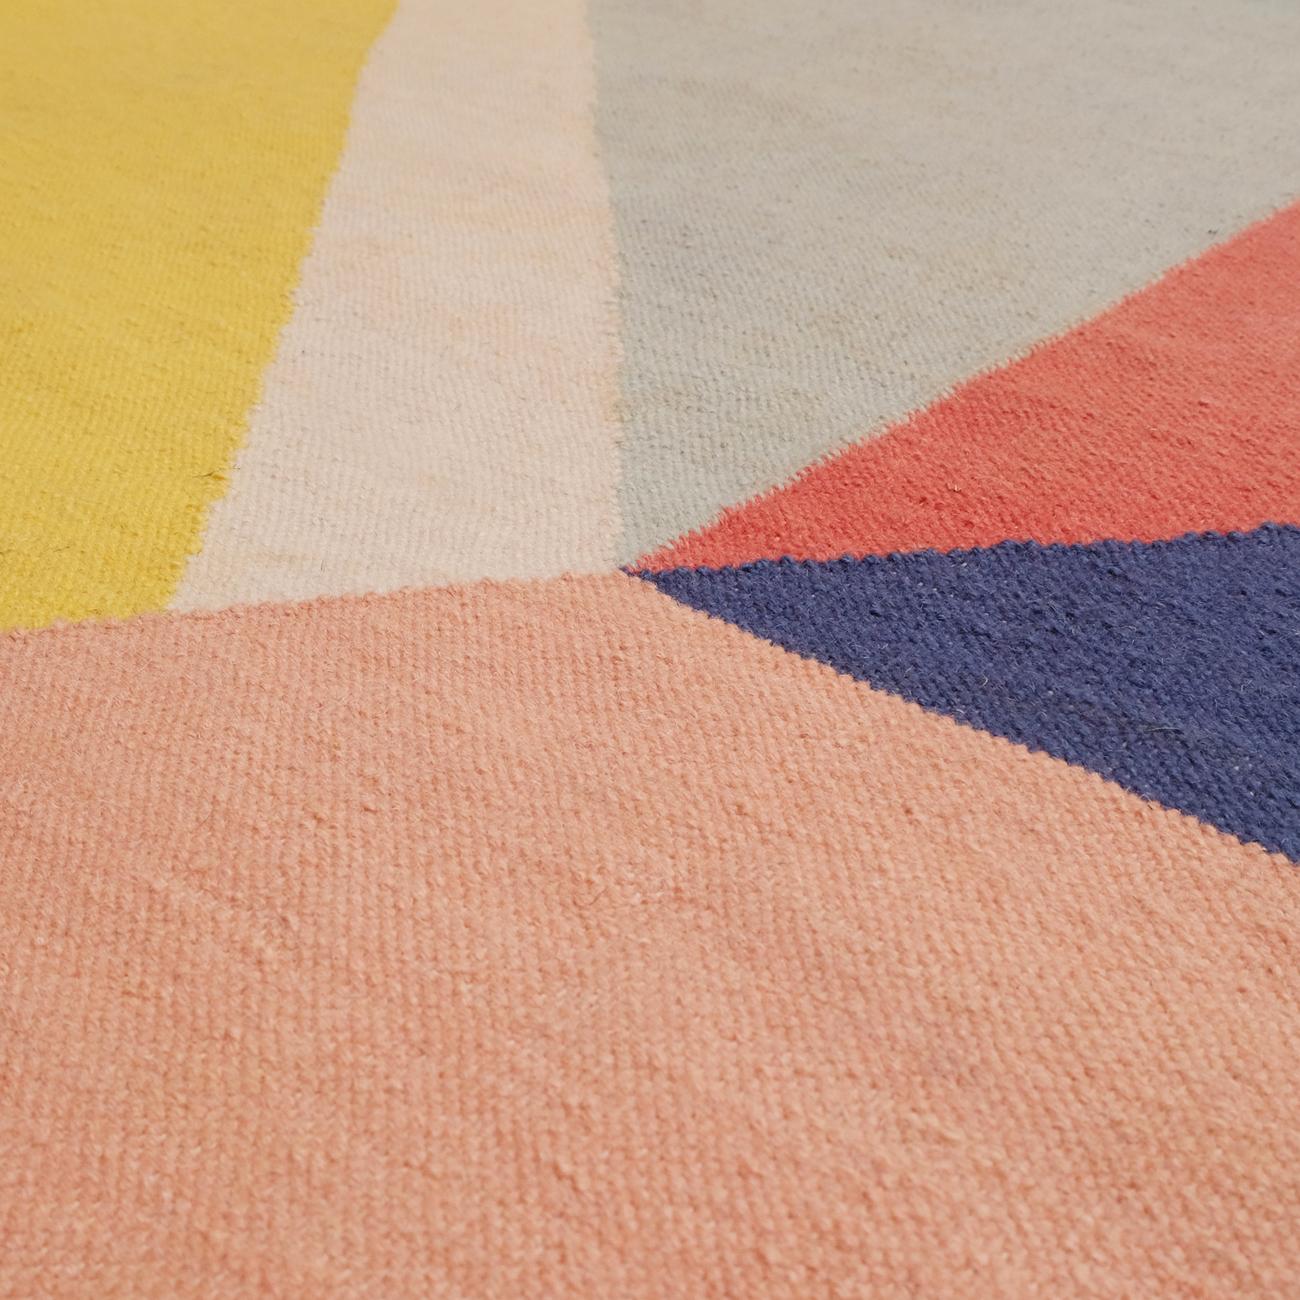 Morning Dream - Design Rug Ouwen Mori Kilim Carpet Wool Cotton Handwoven Warm
Morning Dream

On this carpet geometry is recomposed into an irregular perspective of architectural forms. The colour gives these forms a sense of time rhythm to create a